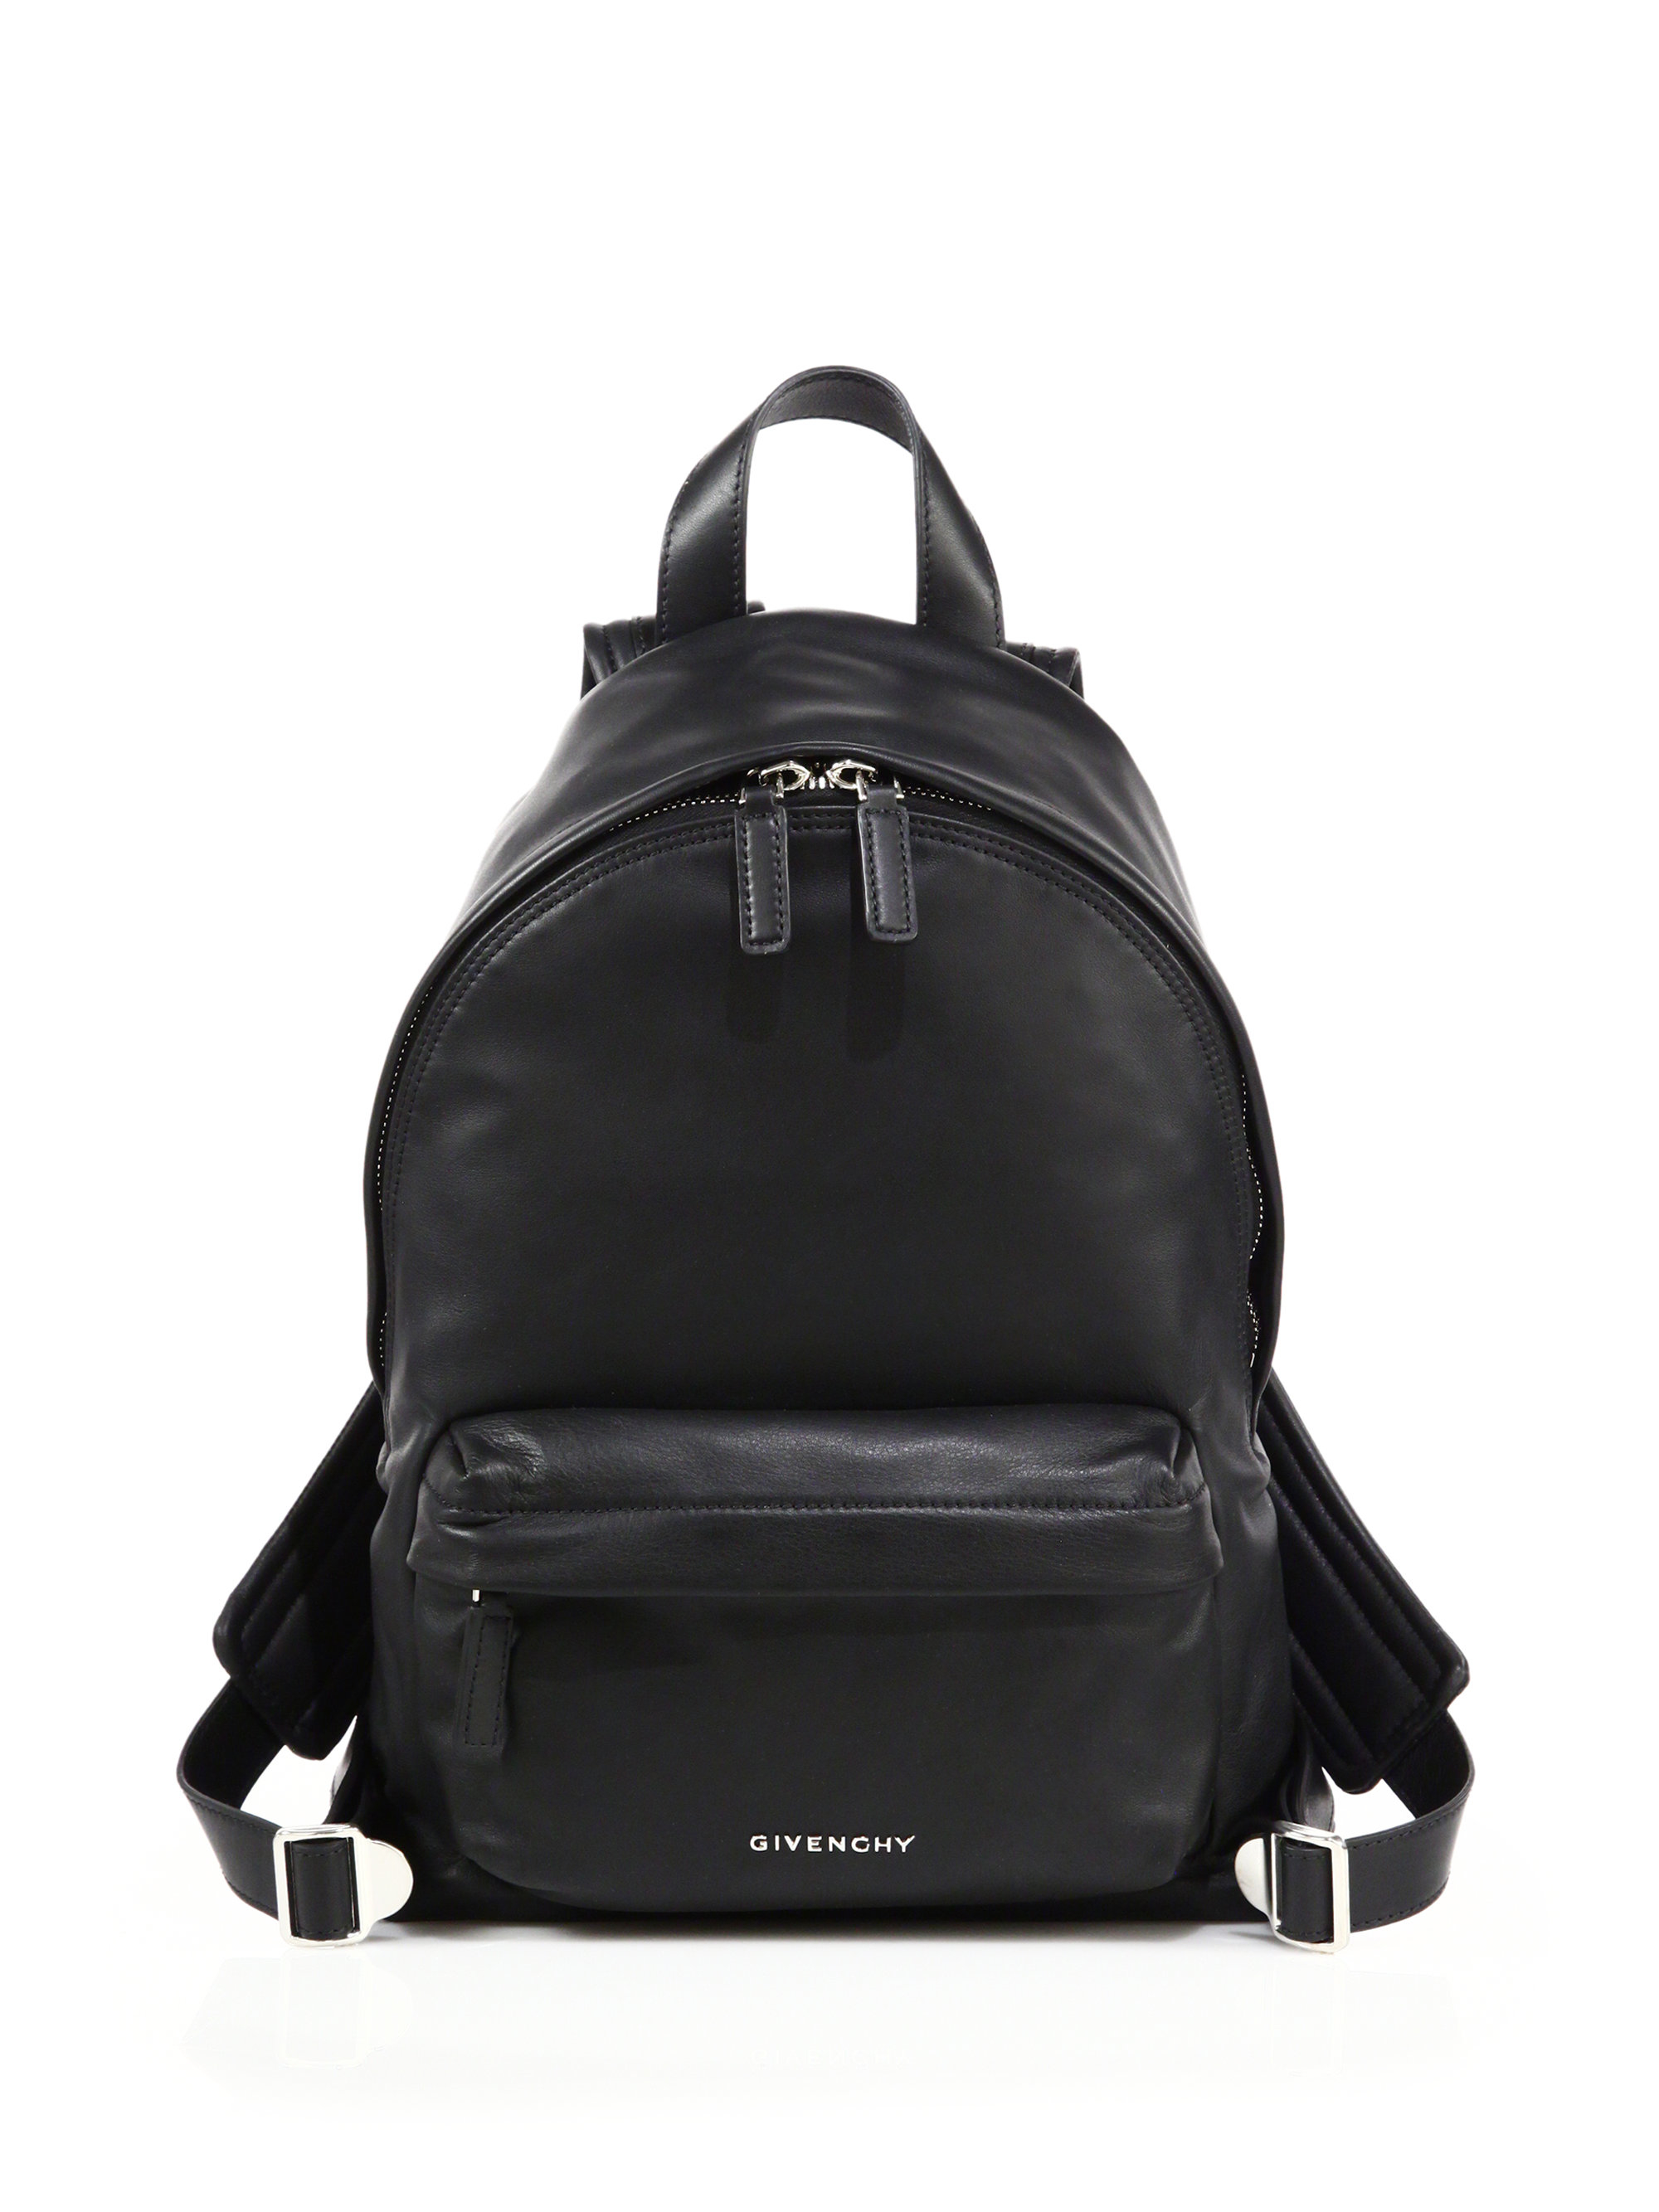 Givenchy Mini Leather Backpack in Black | Lyst